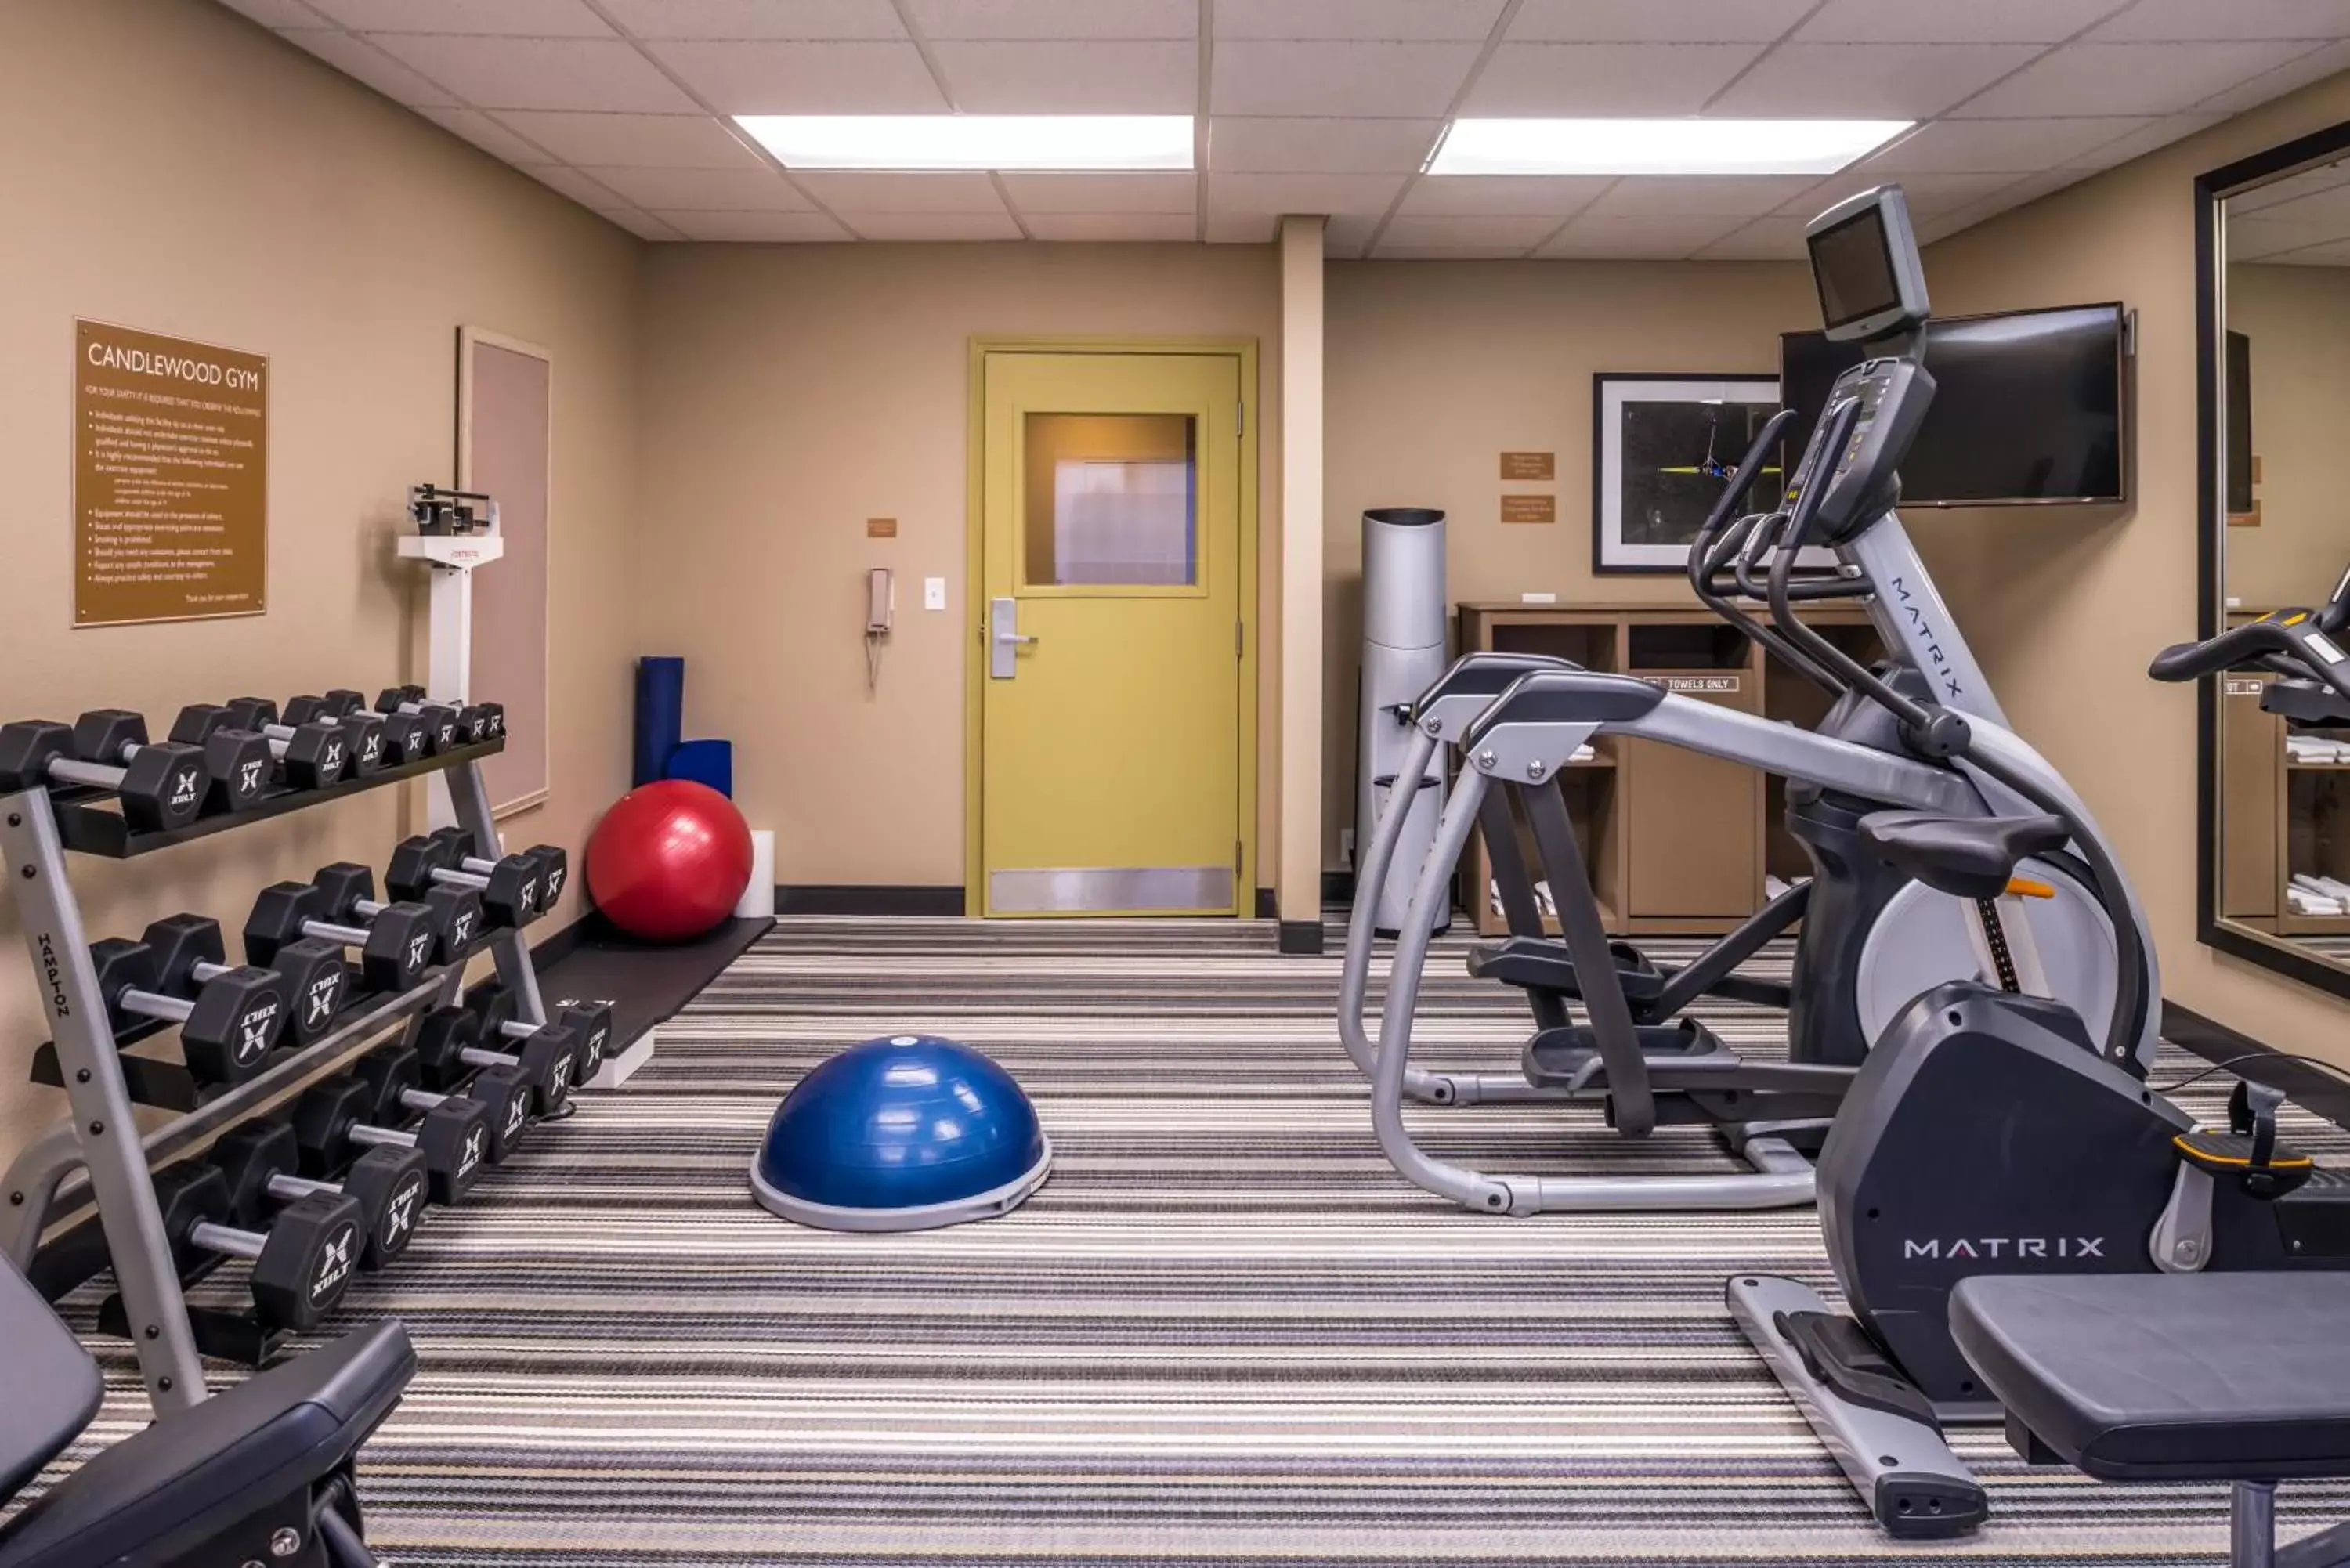 Fitness centre/facilities, Fitness Center/Facilities in Candlewood Suites Paducah, an IHG Hotel